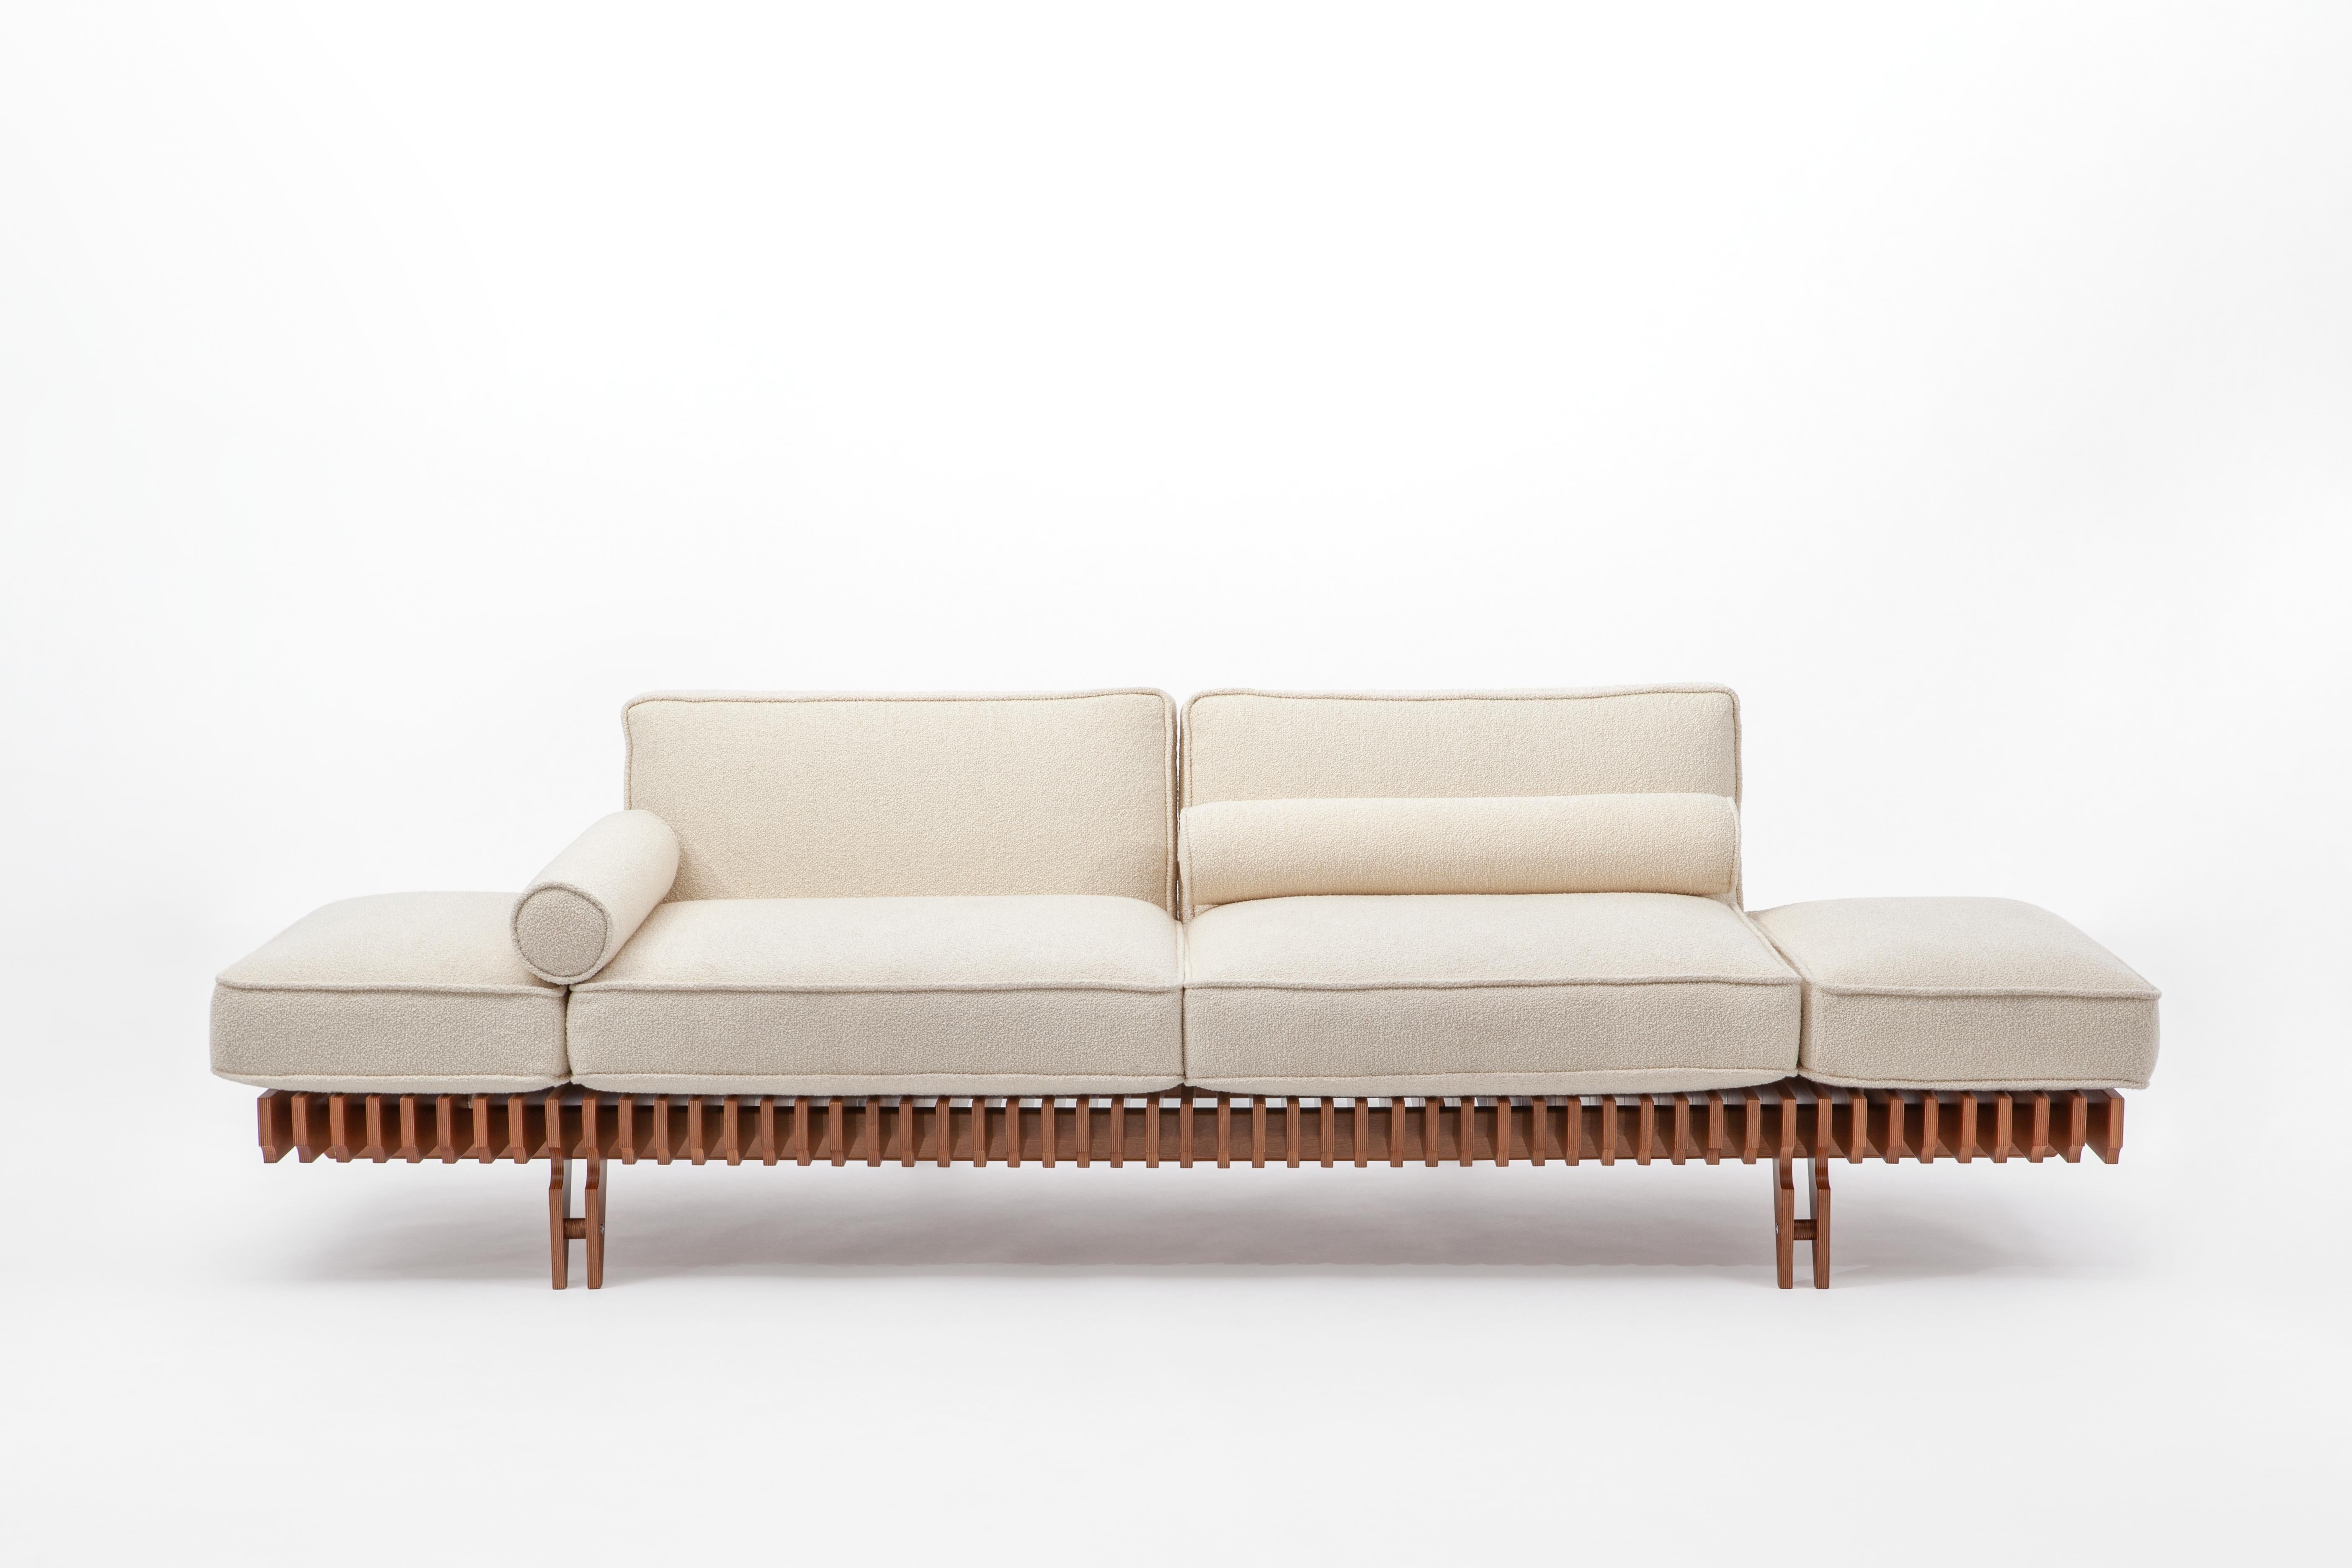 Muir Sofa by SEM
Dimensions: D265 x W96 x H77 cm
Material:Mahogany stained birch plywood structure, Padding in feather with upholstery in Torrilana Fabric
Costumized leather and fabric available on request.

The idea for the 'MUIR' sofa was